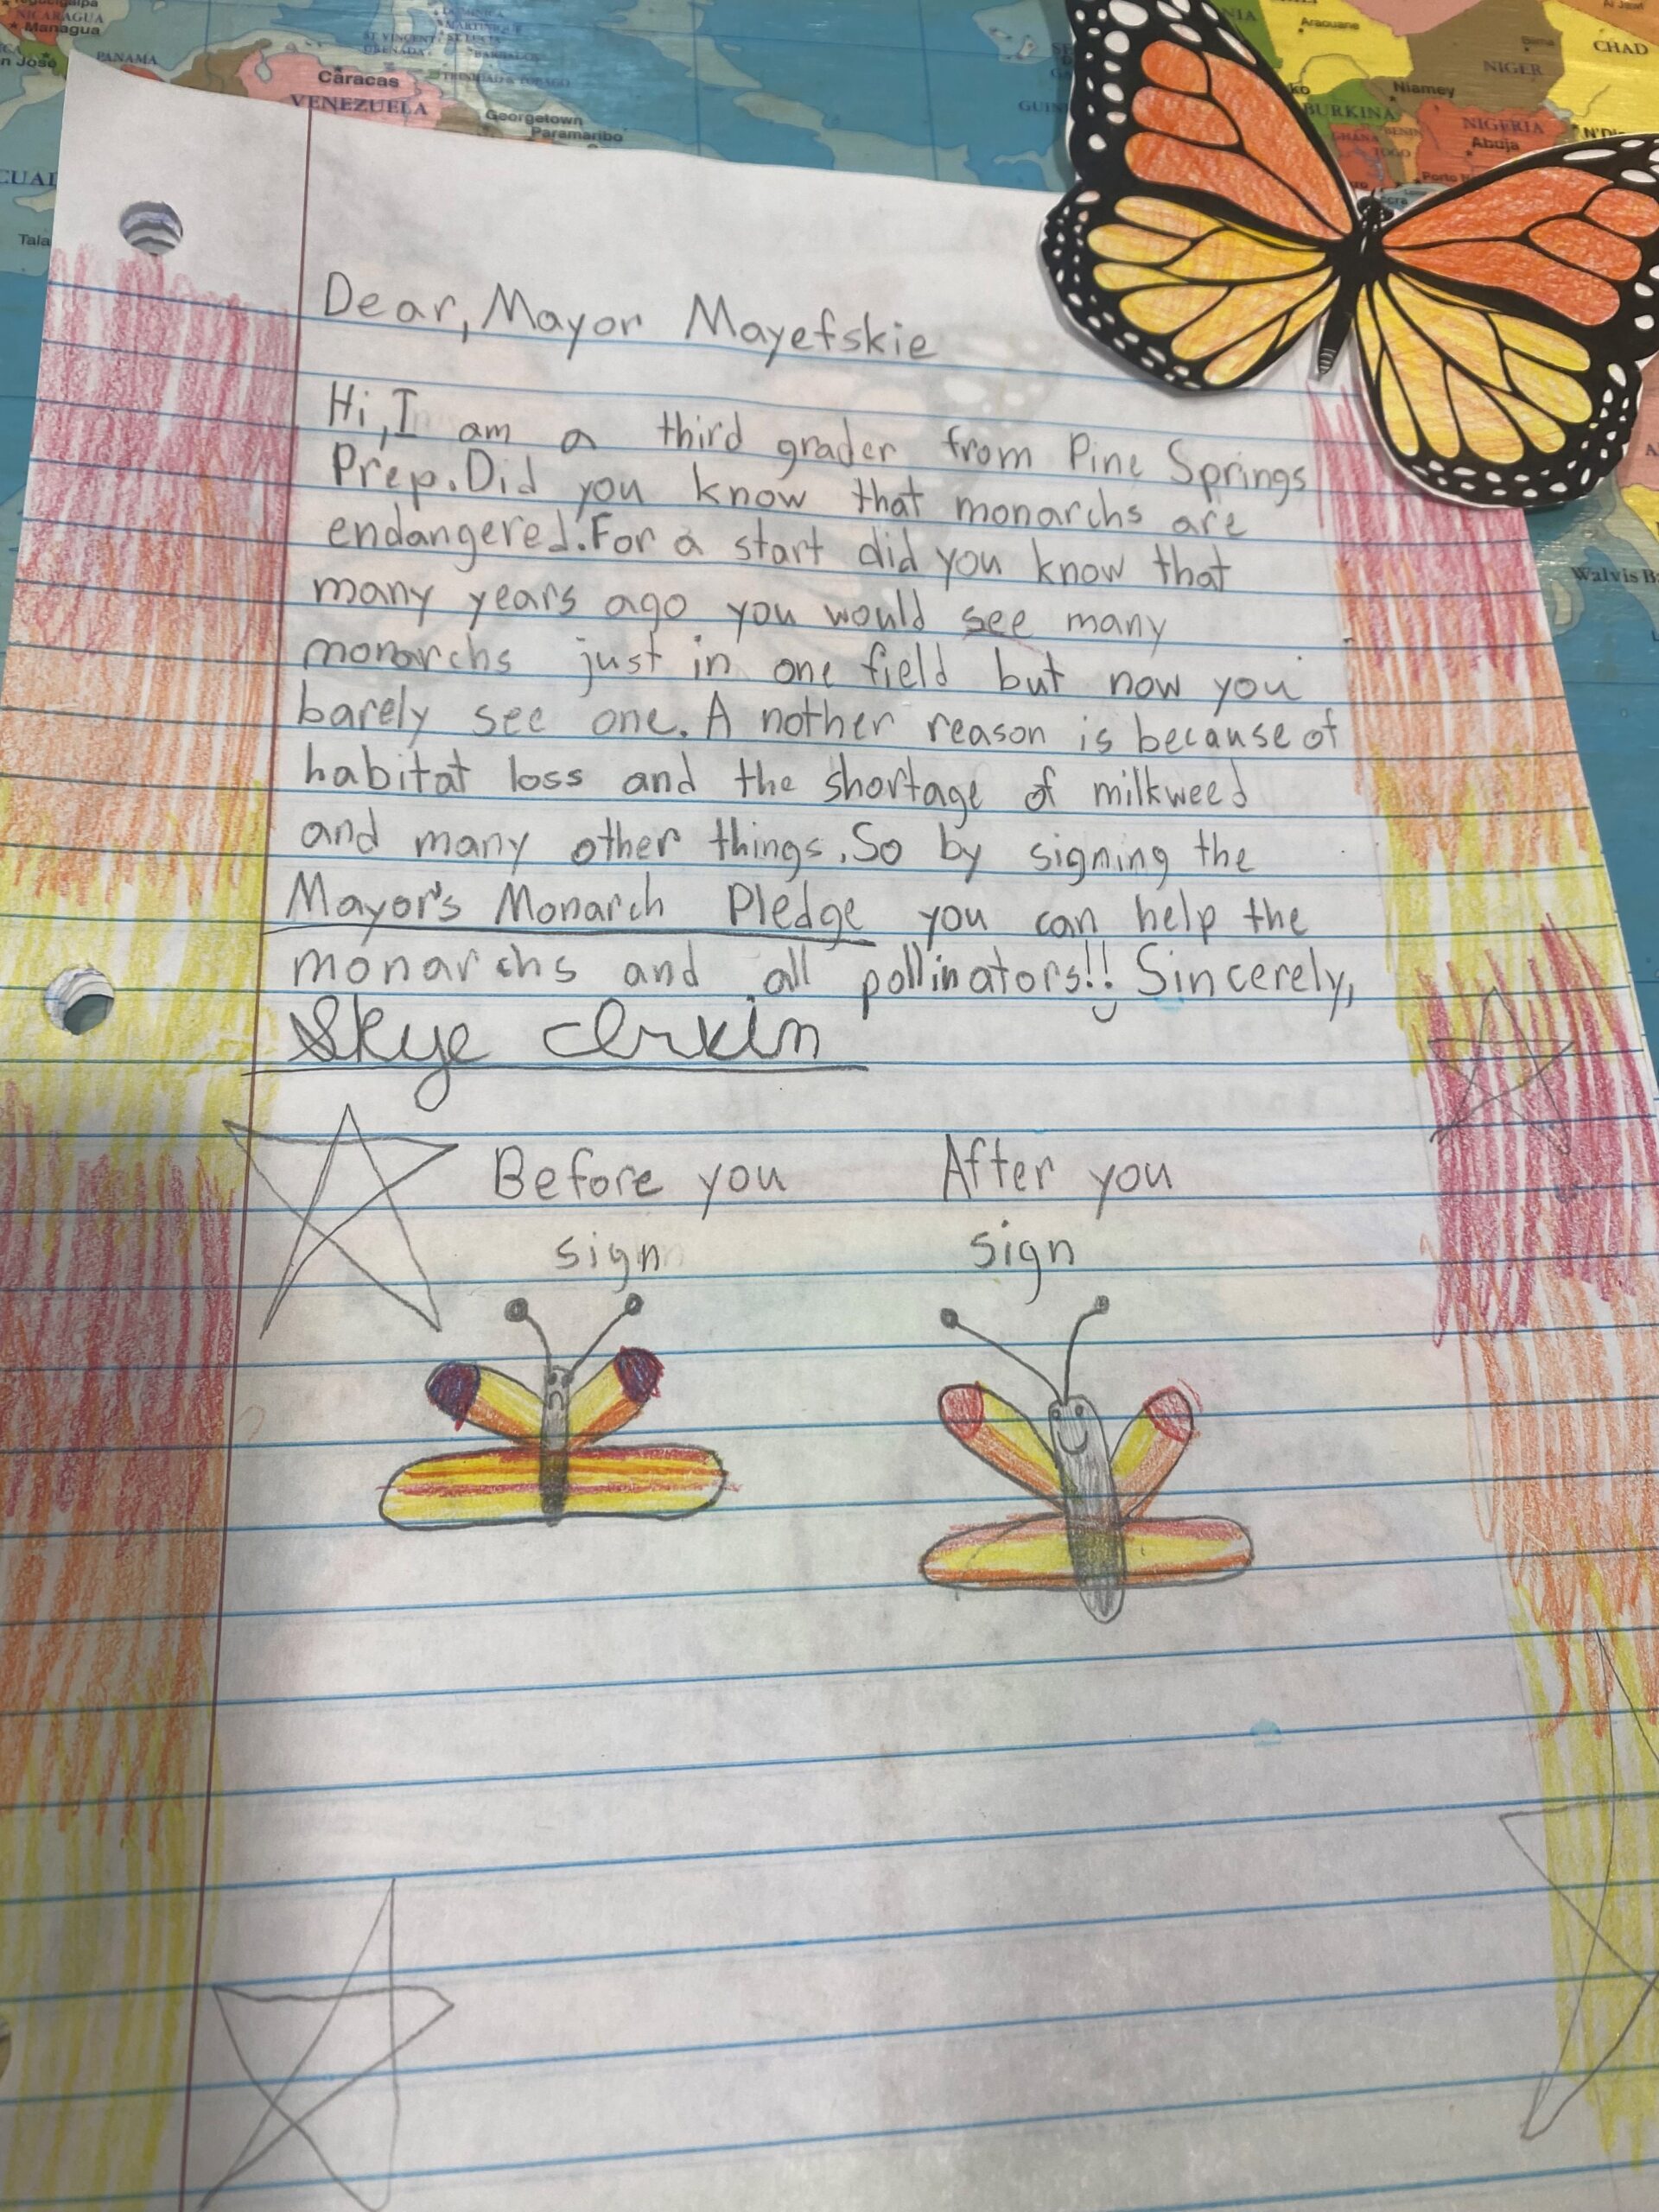 A handwritten letter featuring hand drawn pictures of butterflies on the bottom.